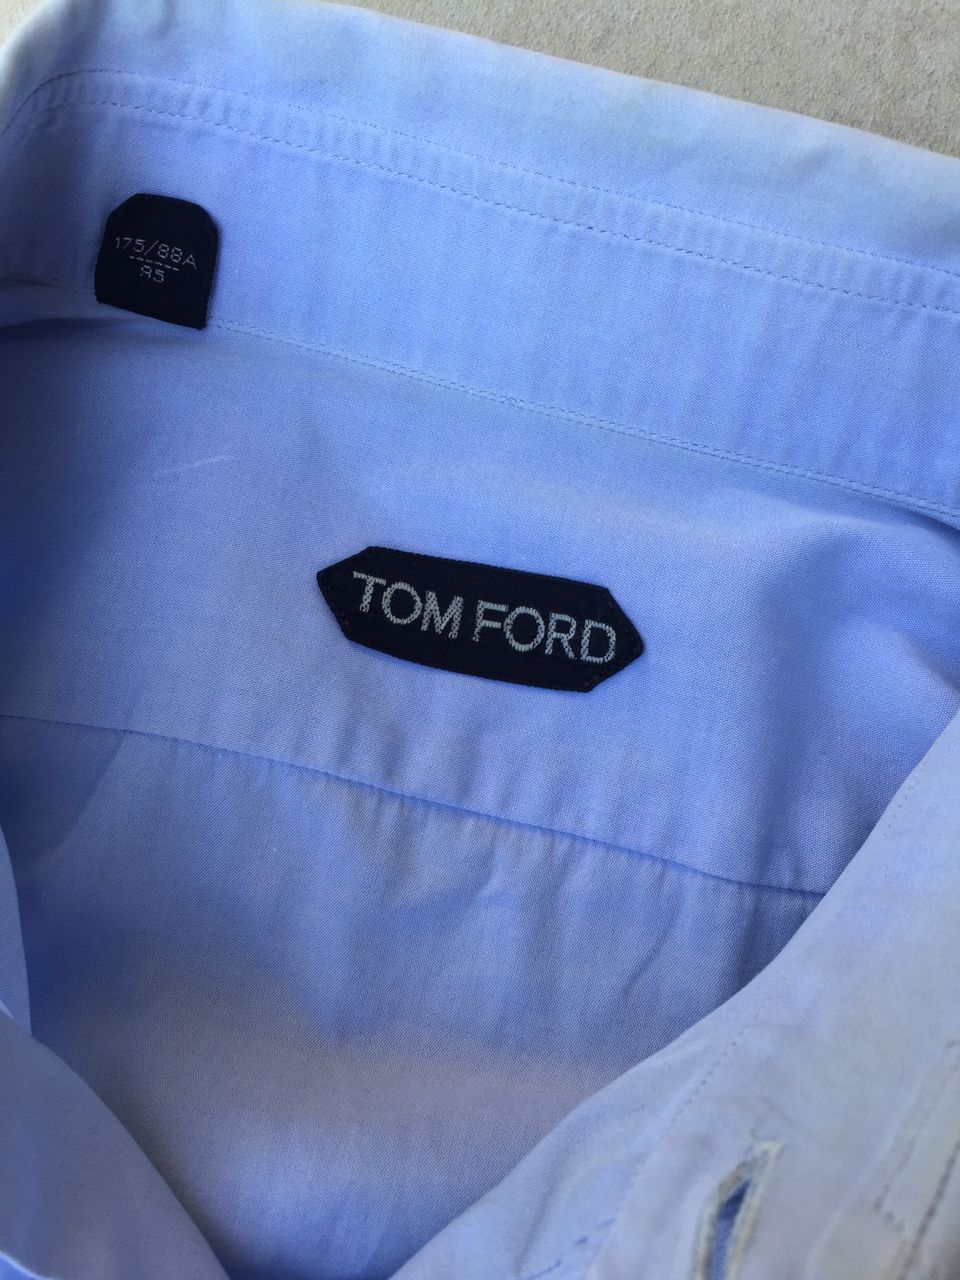 Tom Ford French Cuff button ups shirt - 11